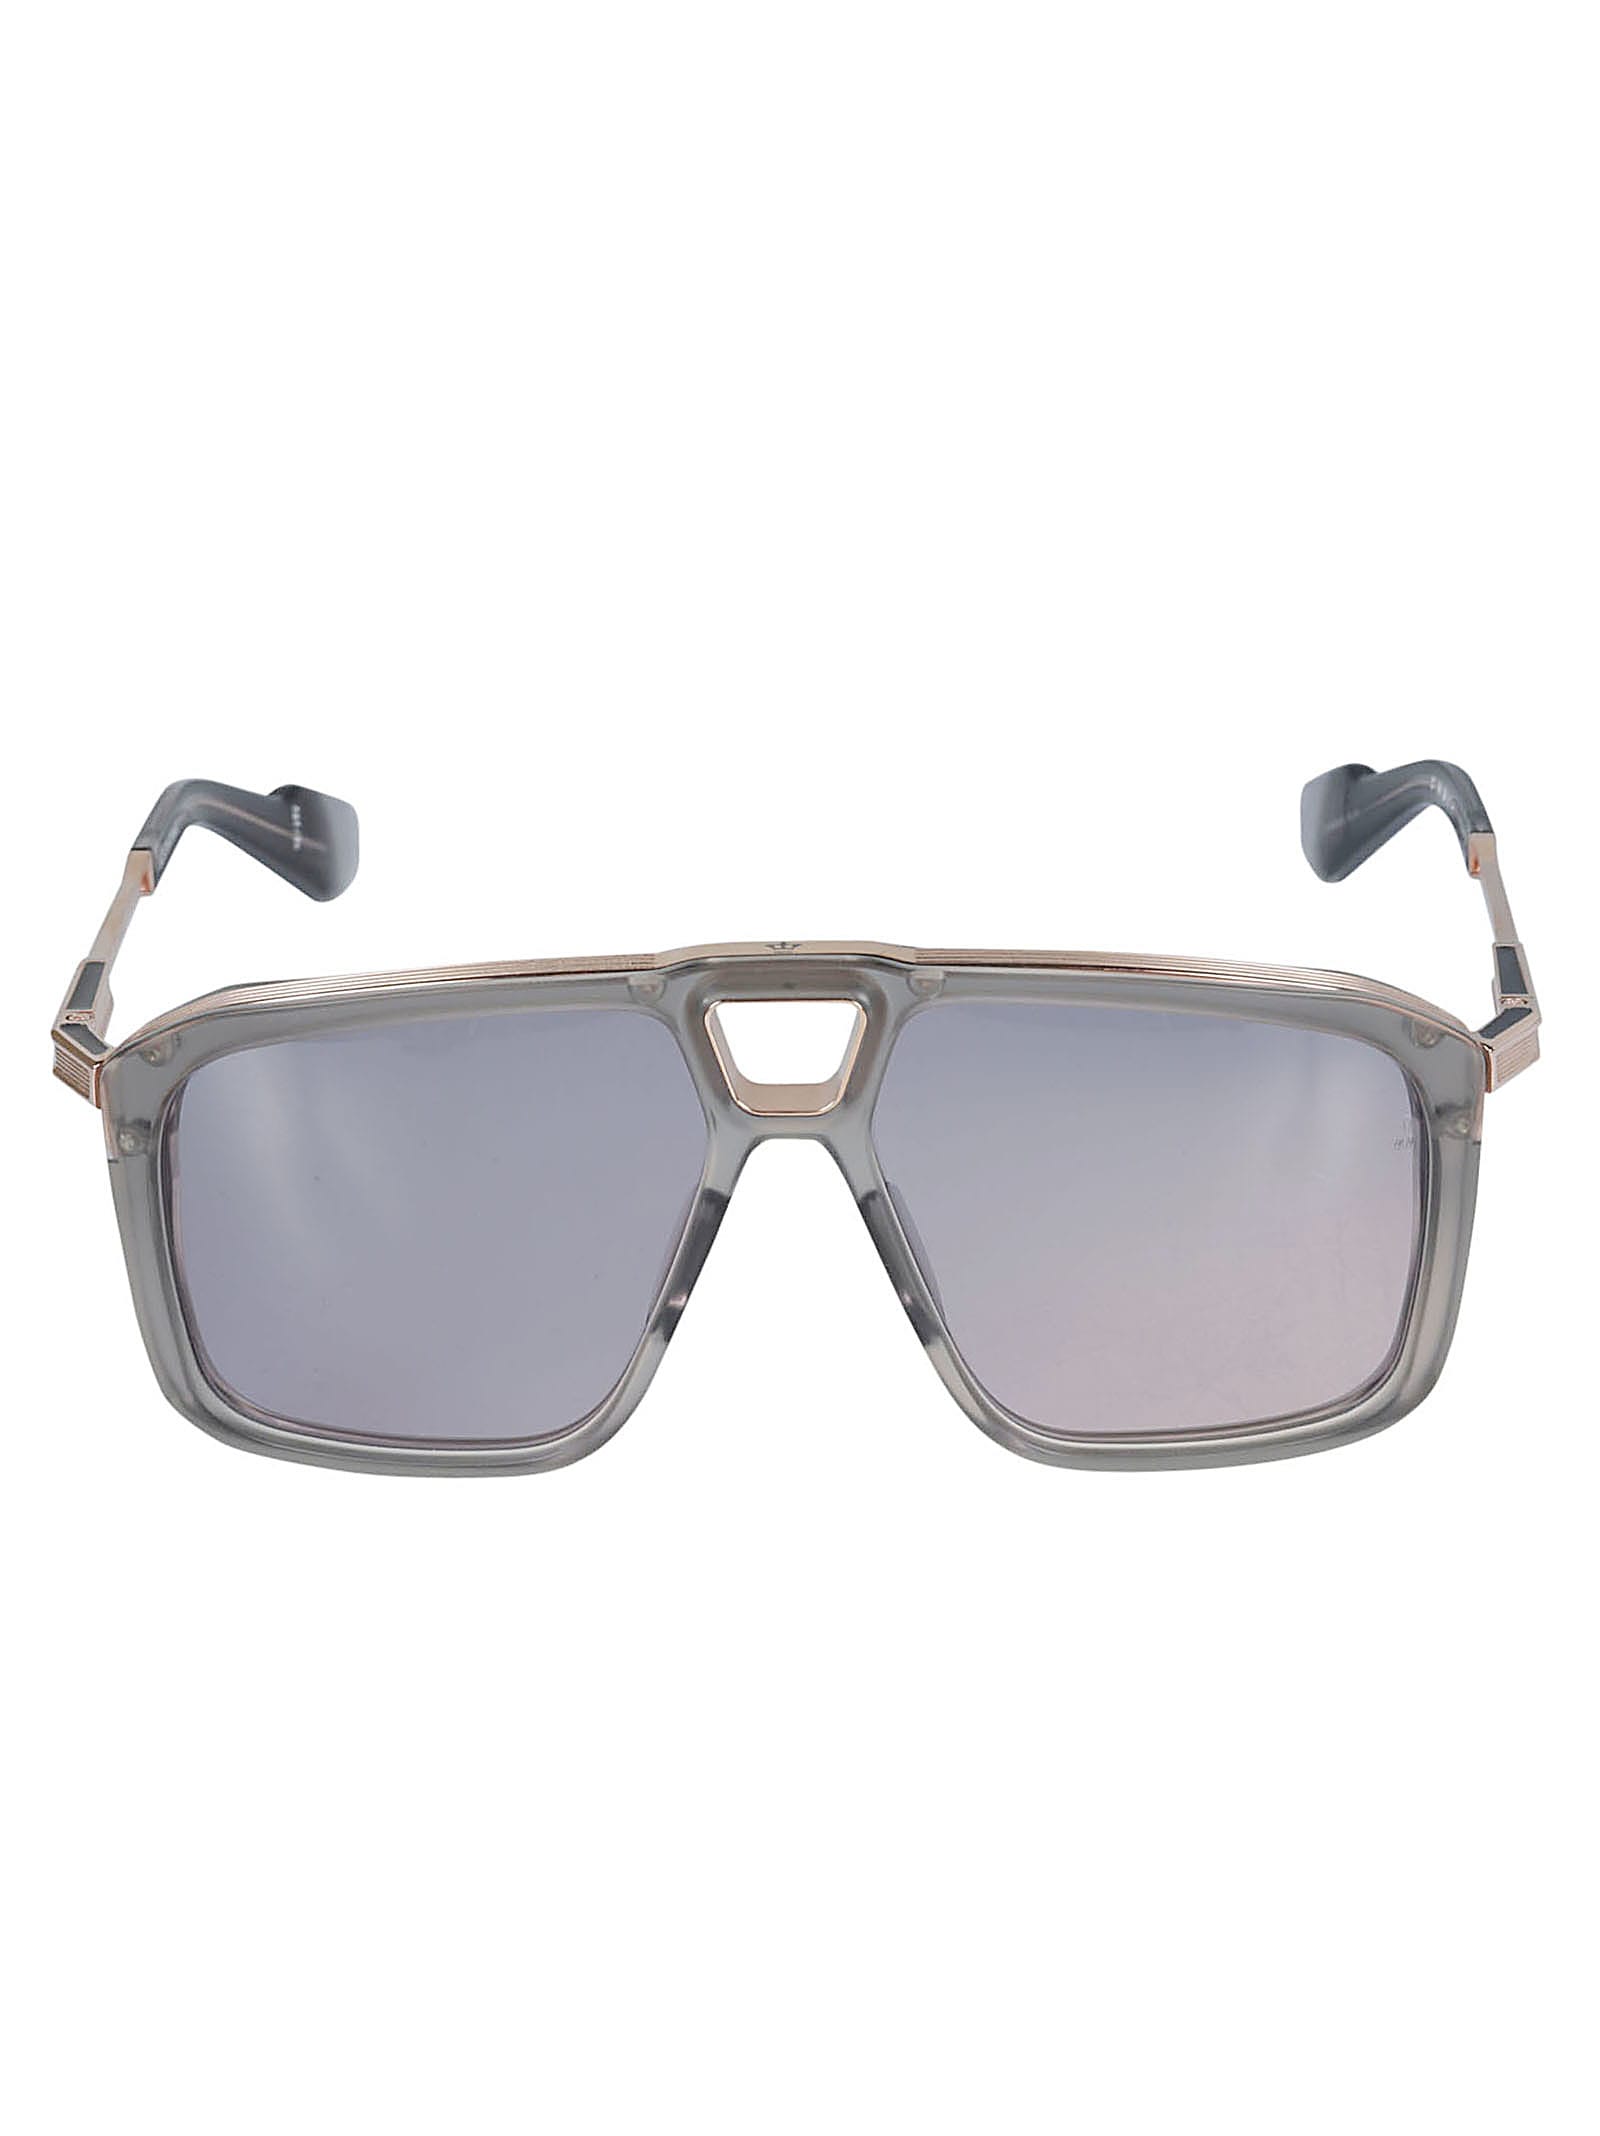 jacques marie mage savoy sunglasses